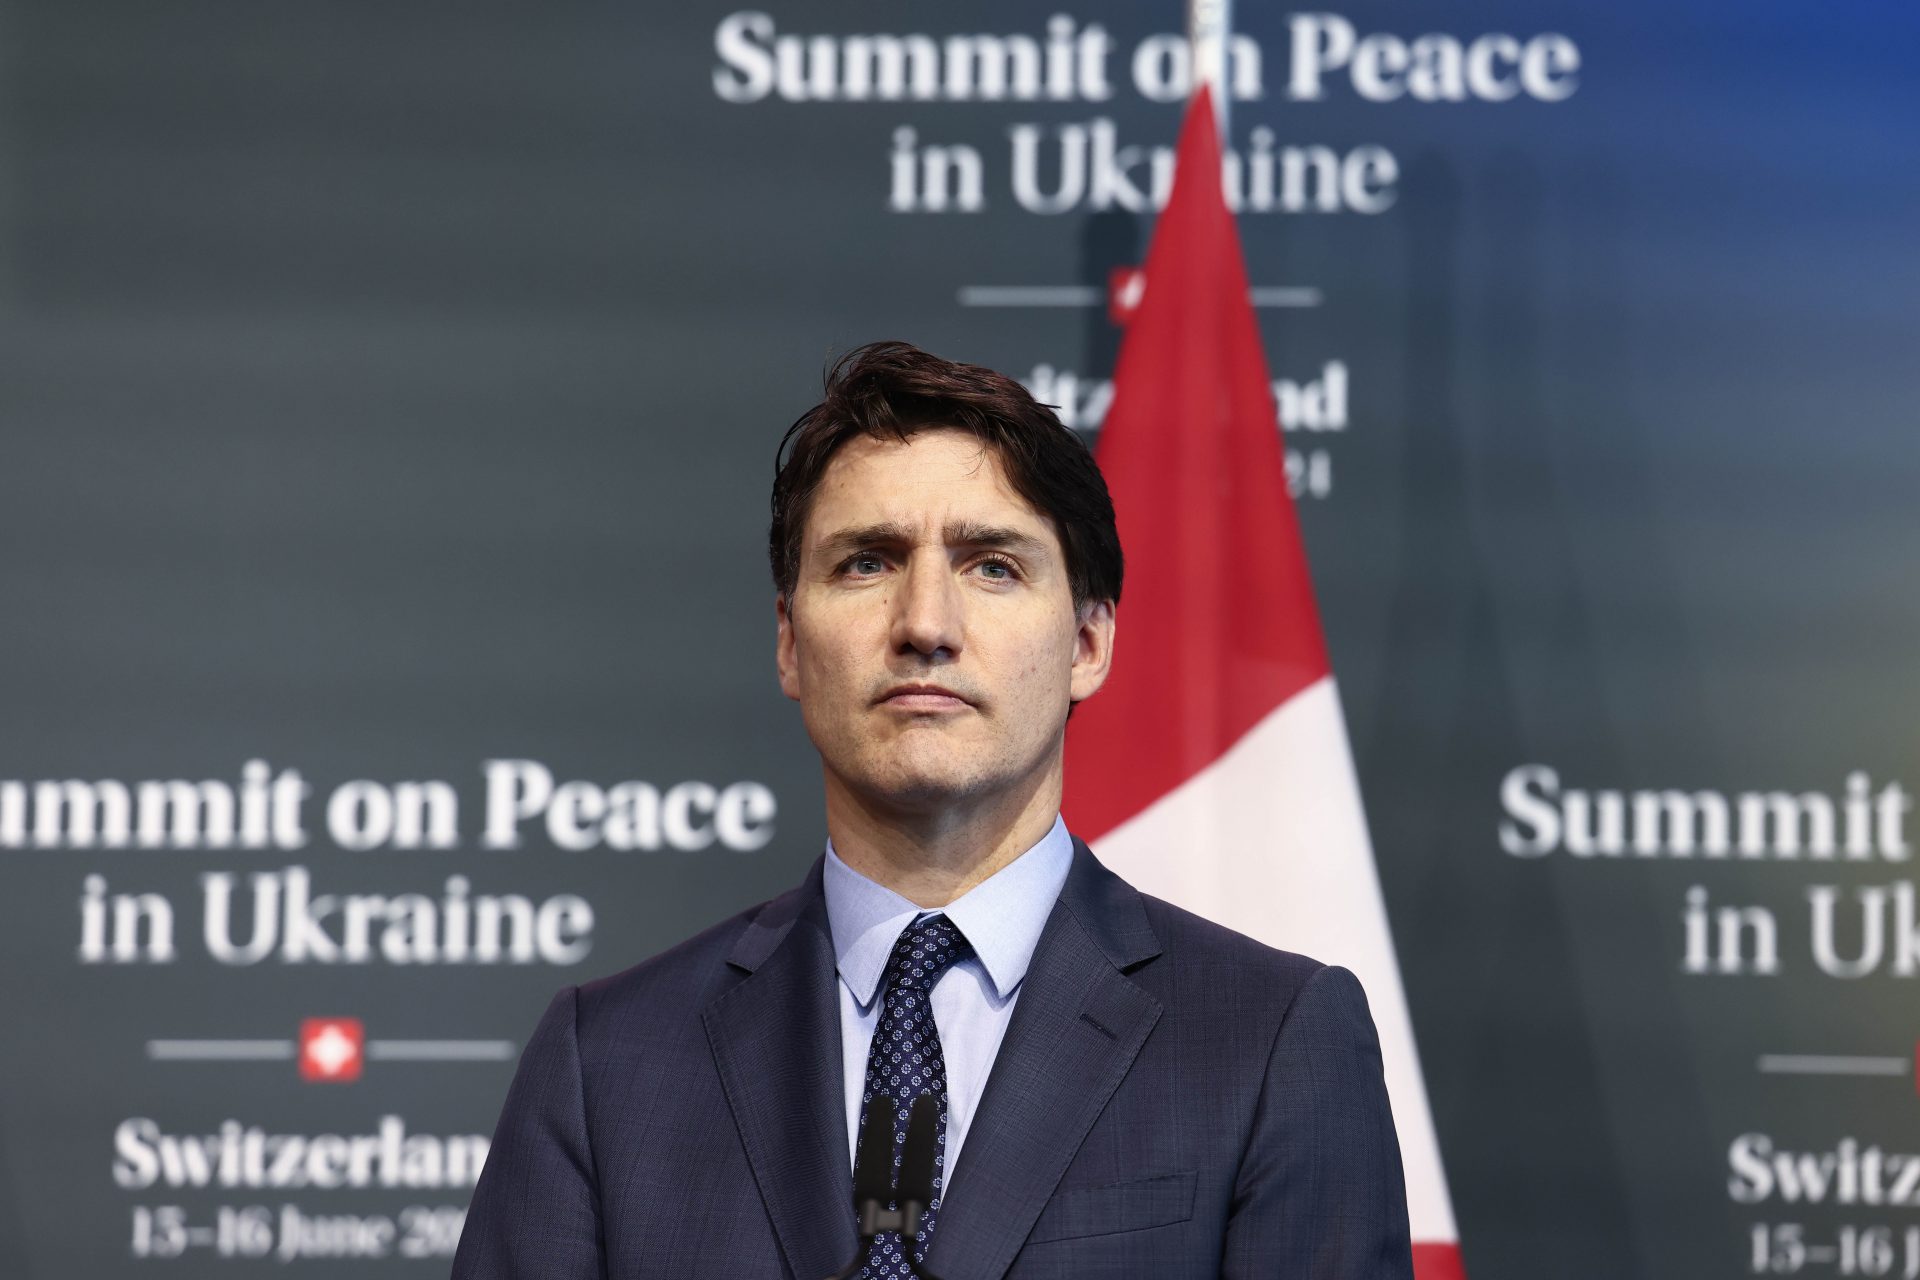 Polling reveals the problems Trudeau is facing